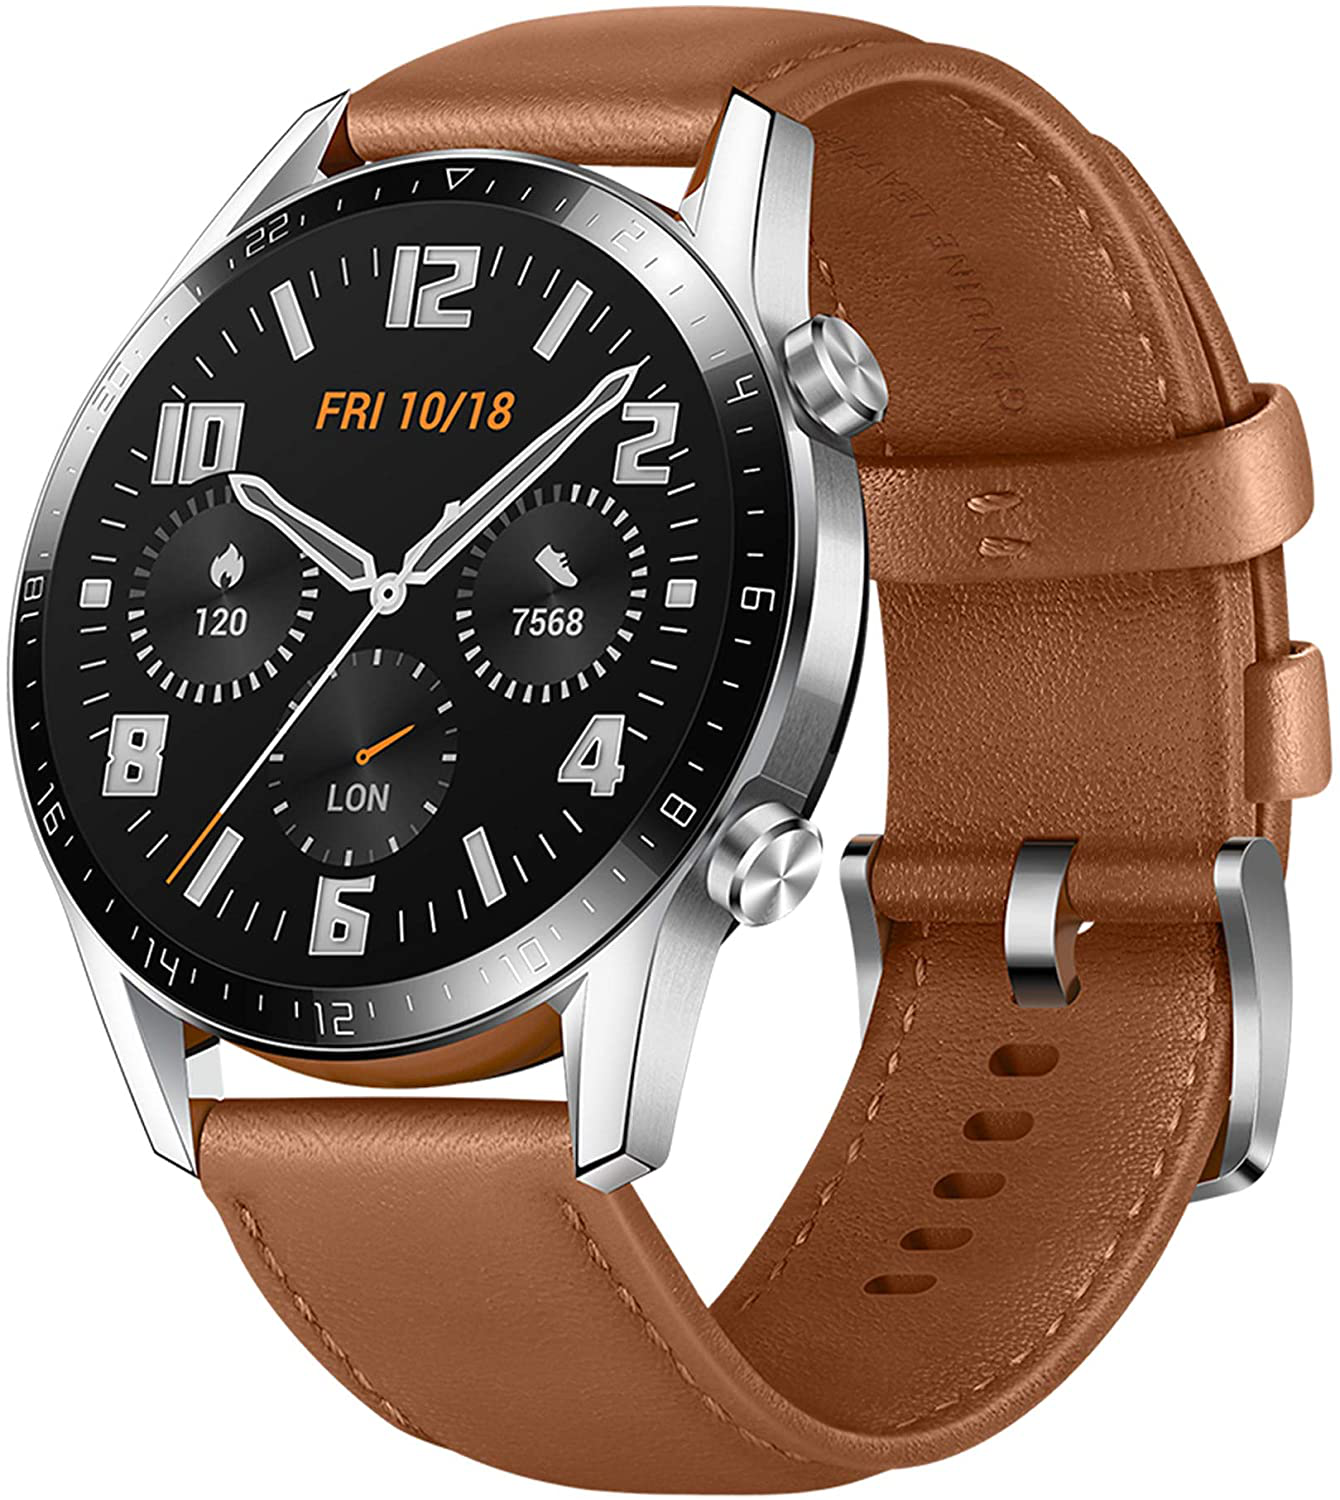 HUAWEI Watch GT 2 2019 Bluetooth SmartWatch, Longer Lasting 2 Weeks Battery Life, Waterproof, Compatible with iPhone and Android, 46mm No Warranty International Version (Pebble Brown)